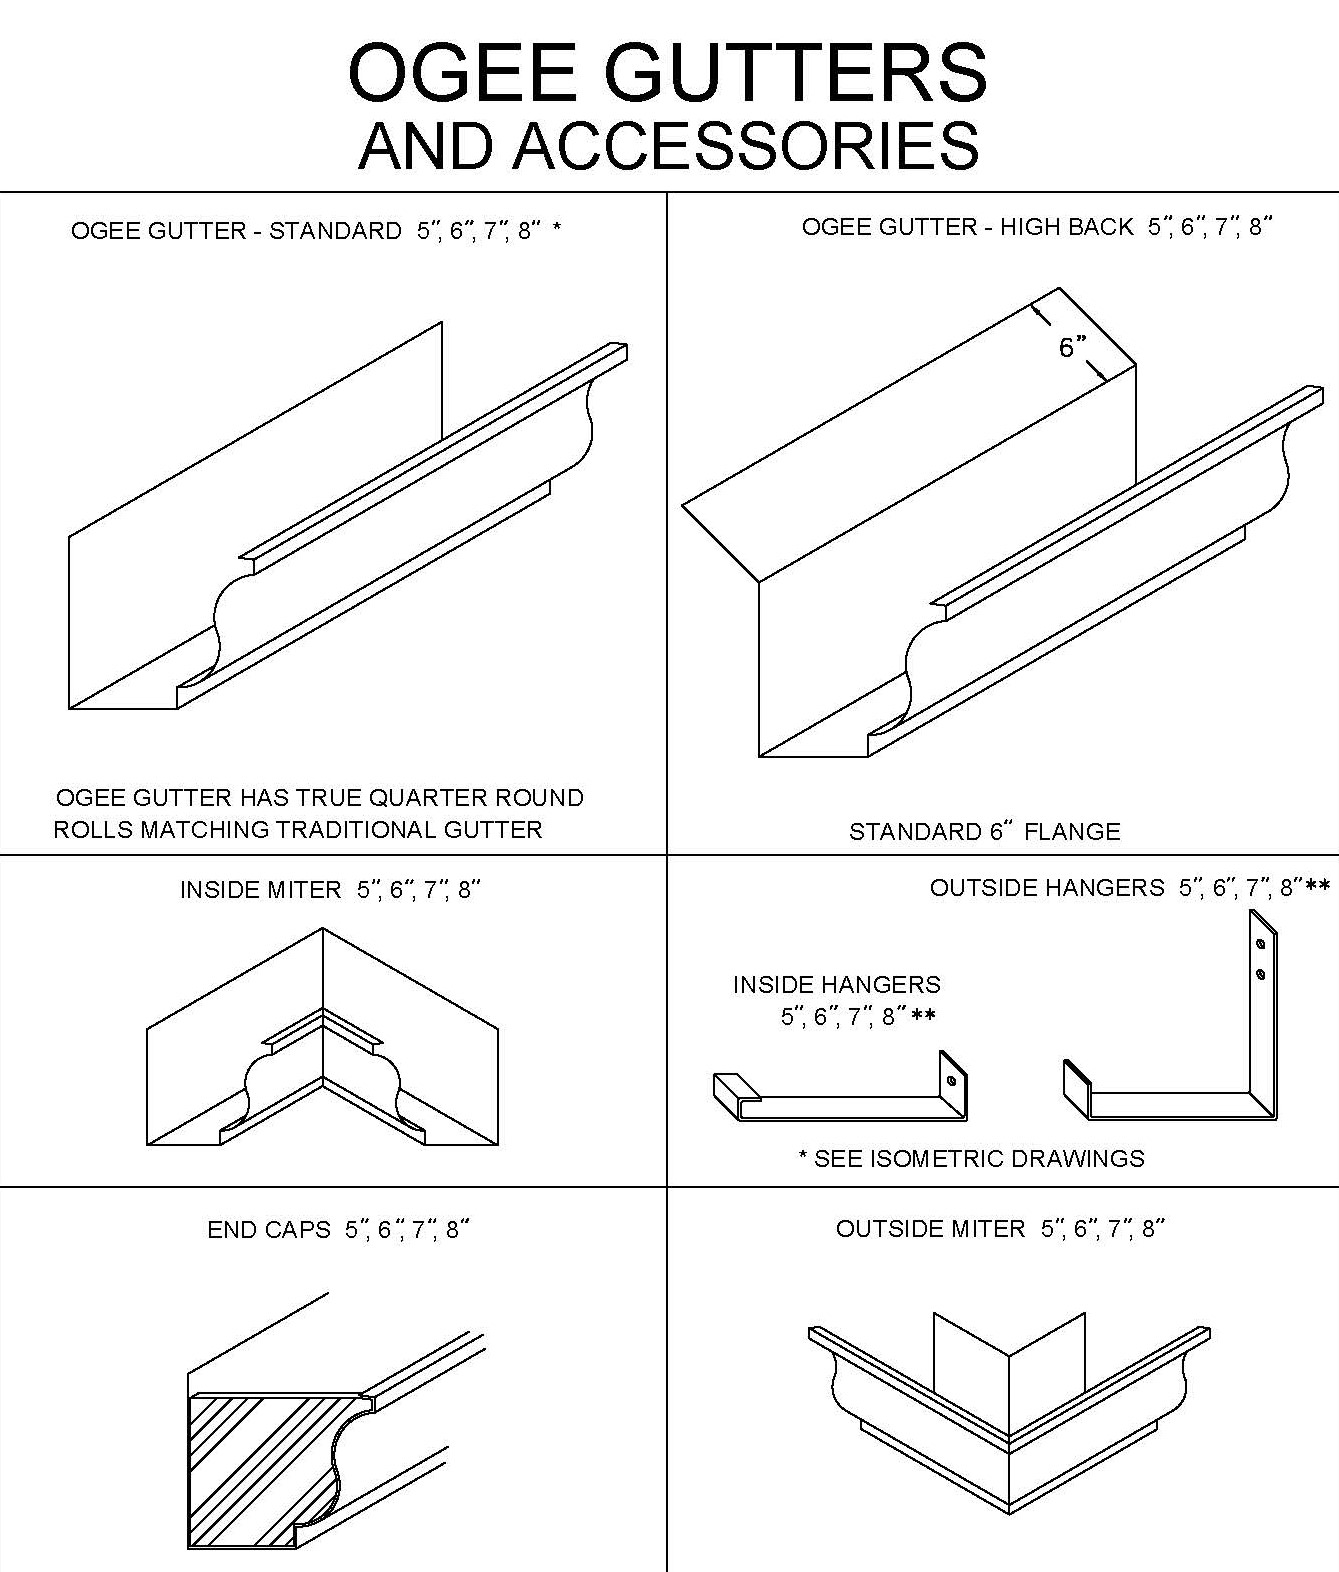 Ogee Gutter and Accessories DETAIL